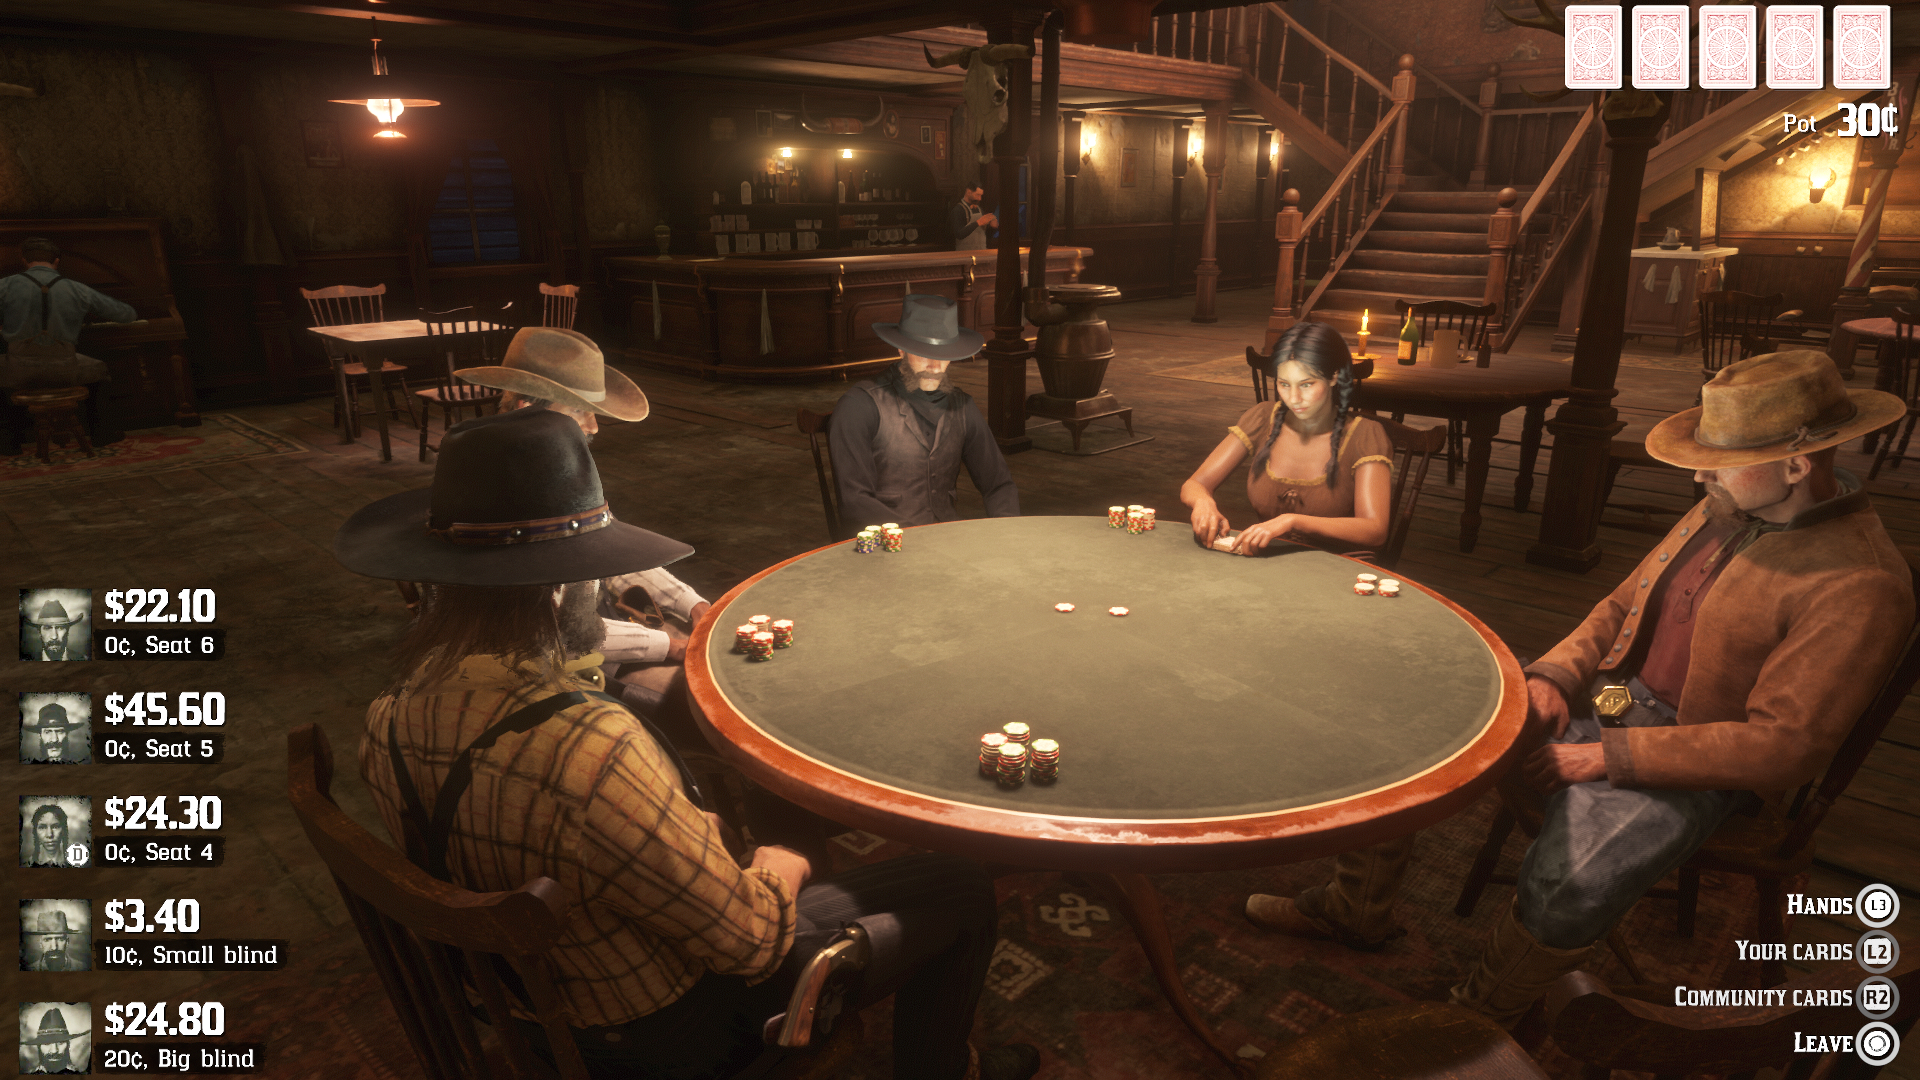 Latest Red Dead Online Update Adds Poker, Ponchos And More